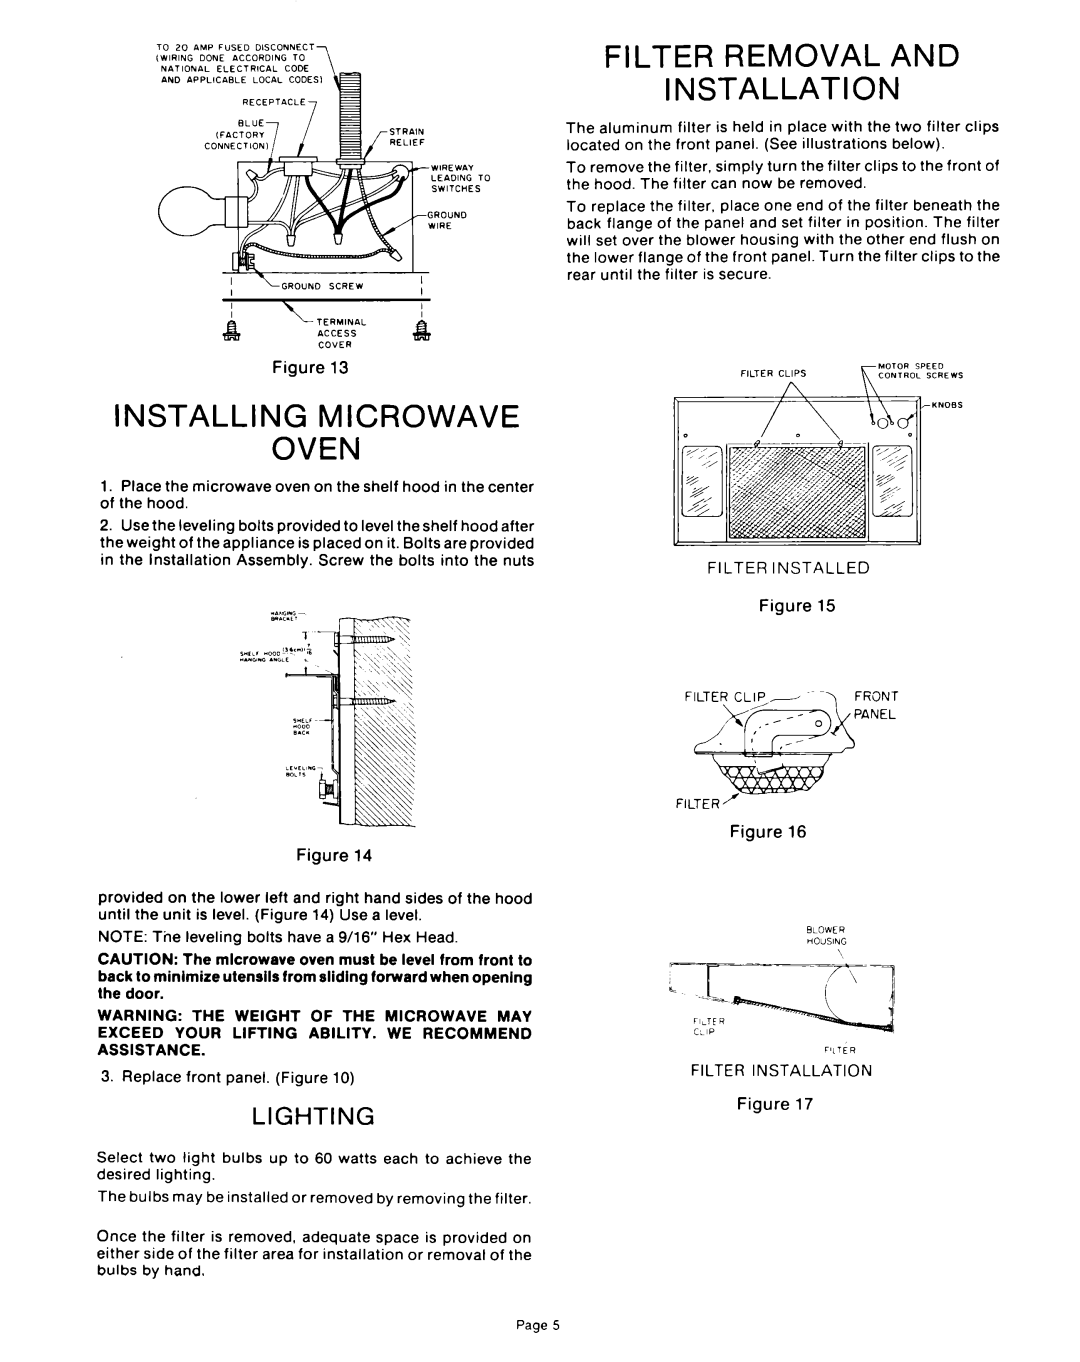 Whirlpool RCH3660 instruction sheet Installing Microwave Oven, Filter Removal And Installation, Lighting 